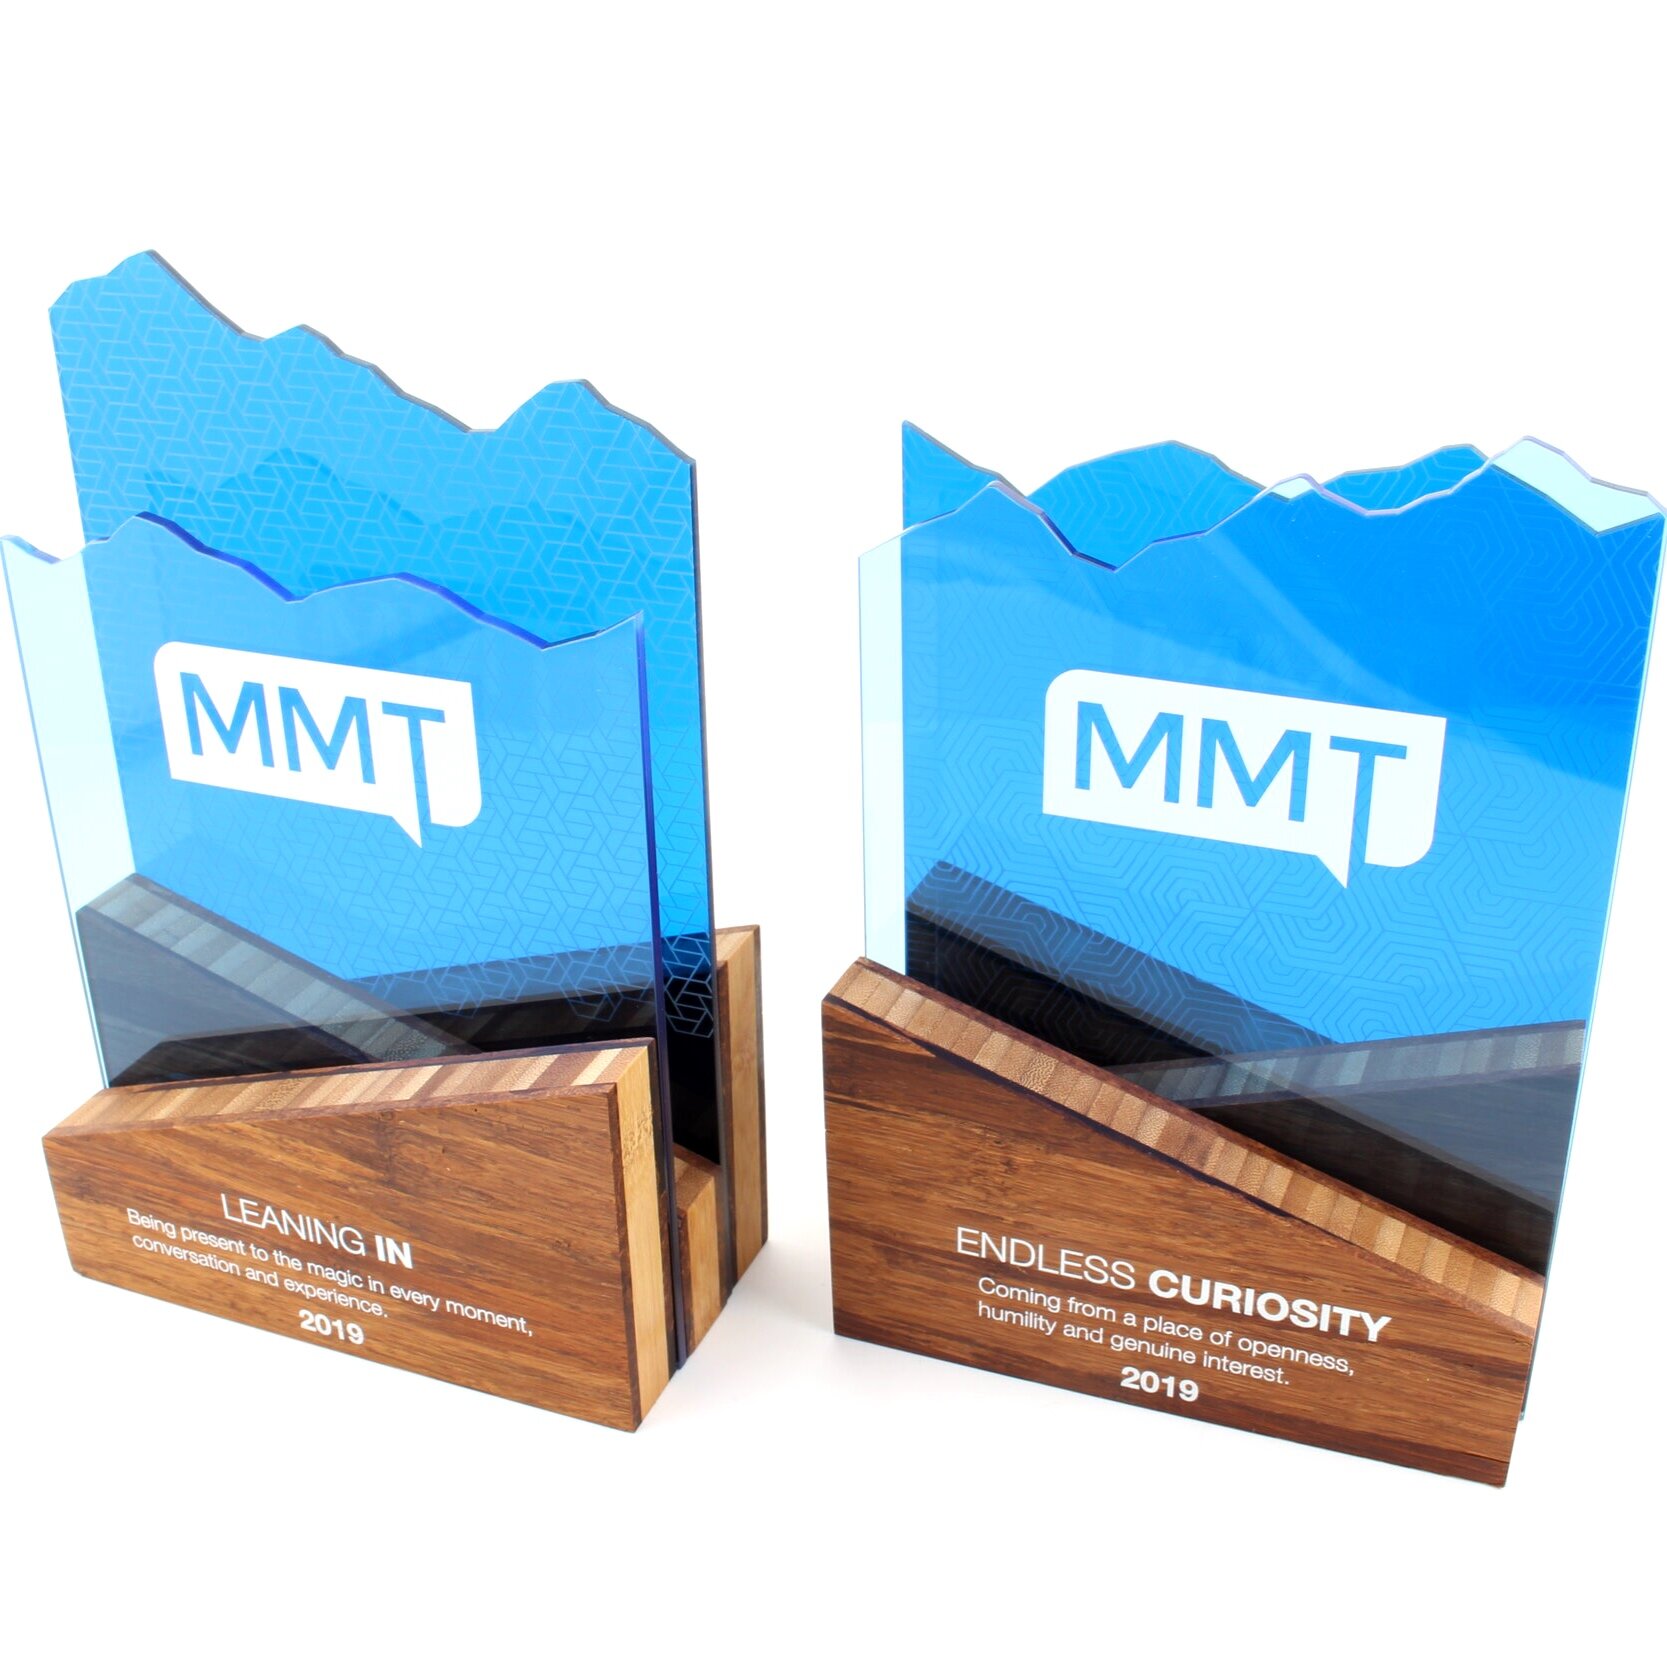 MMT+core+values+trophies+awards+yearly+staff+appreciation+9.jpg